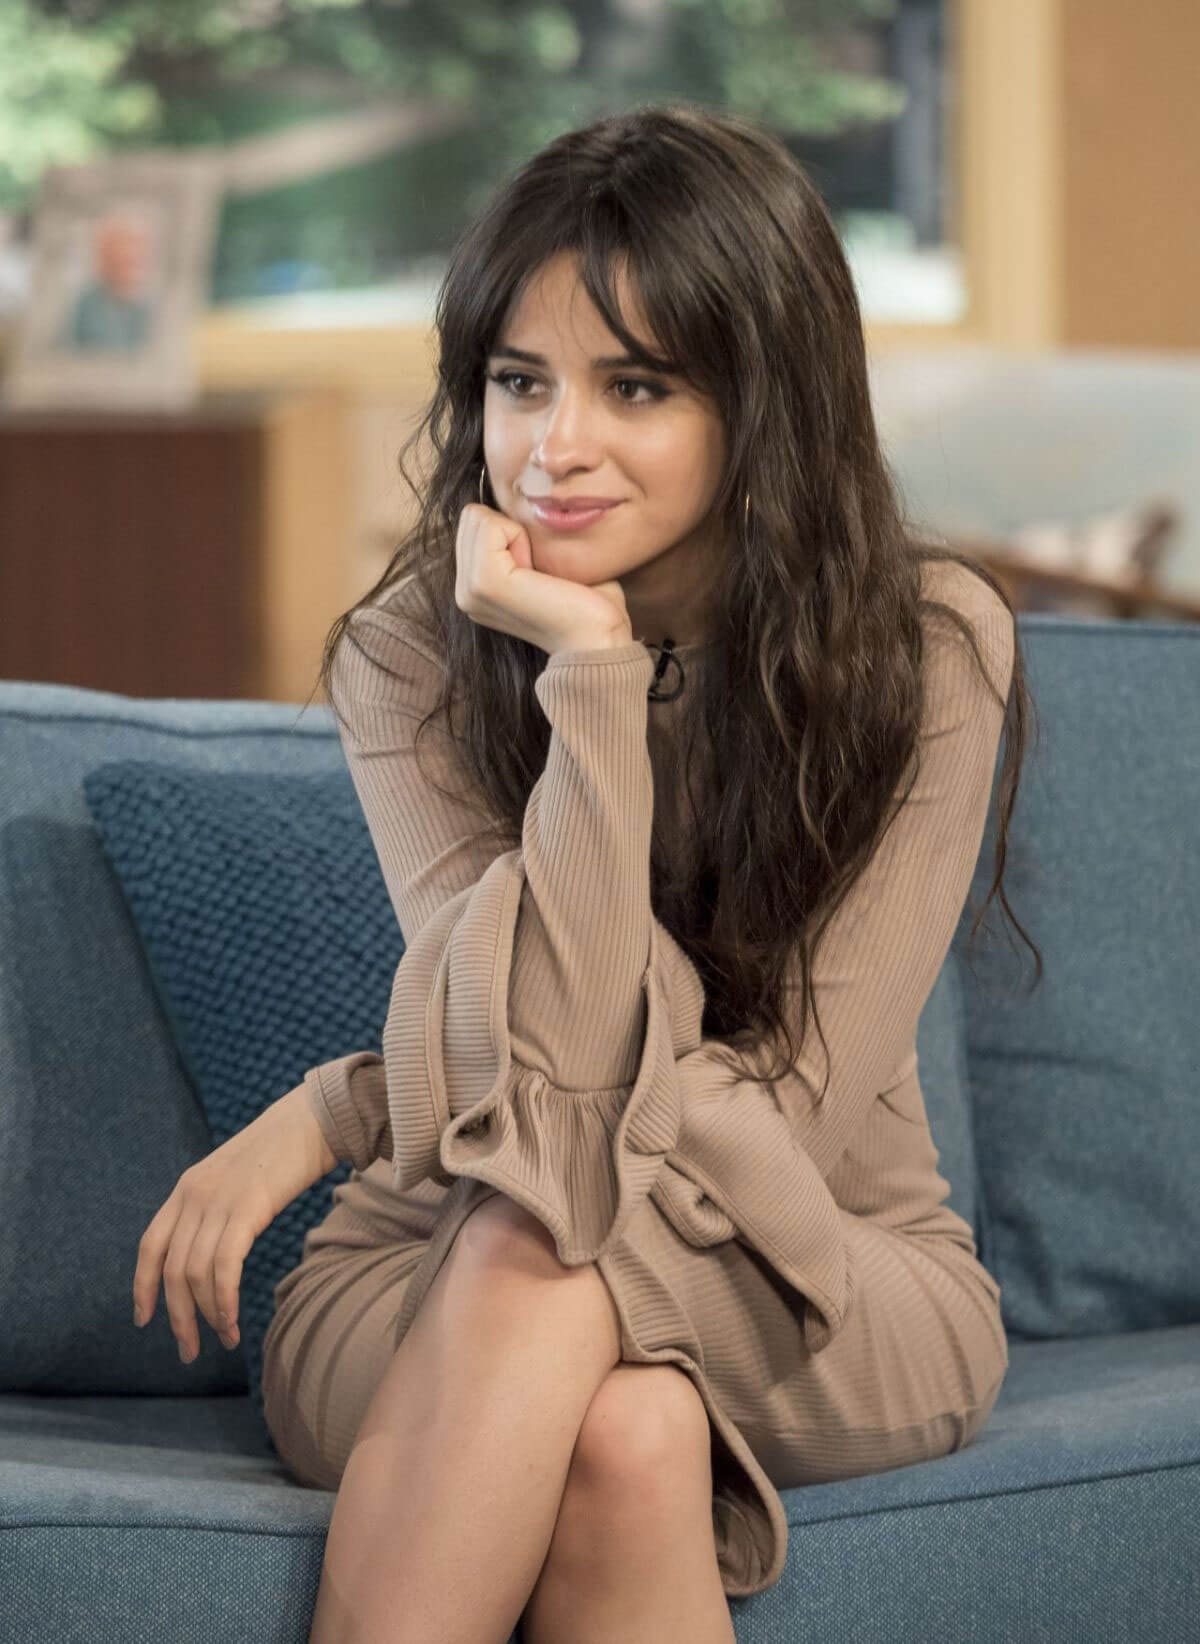 Camila Cabello at This Morning Show in London